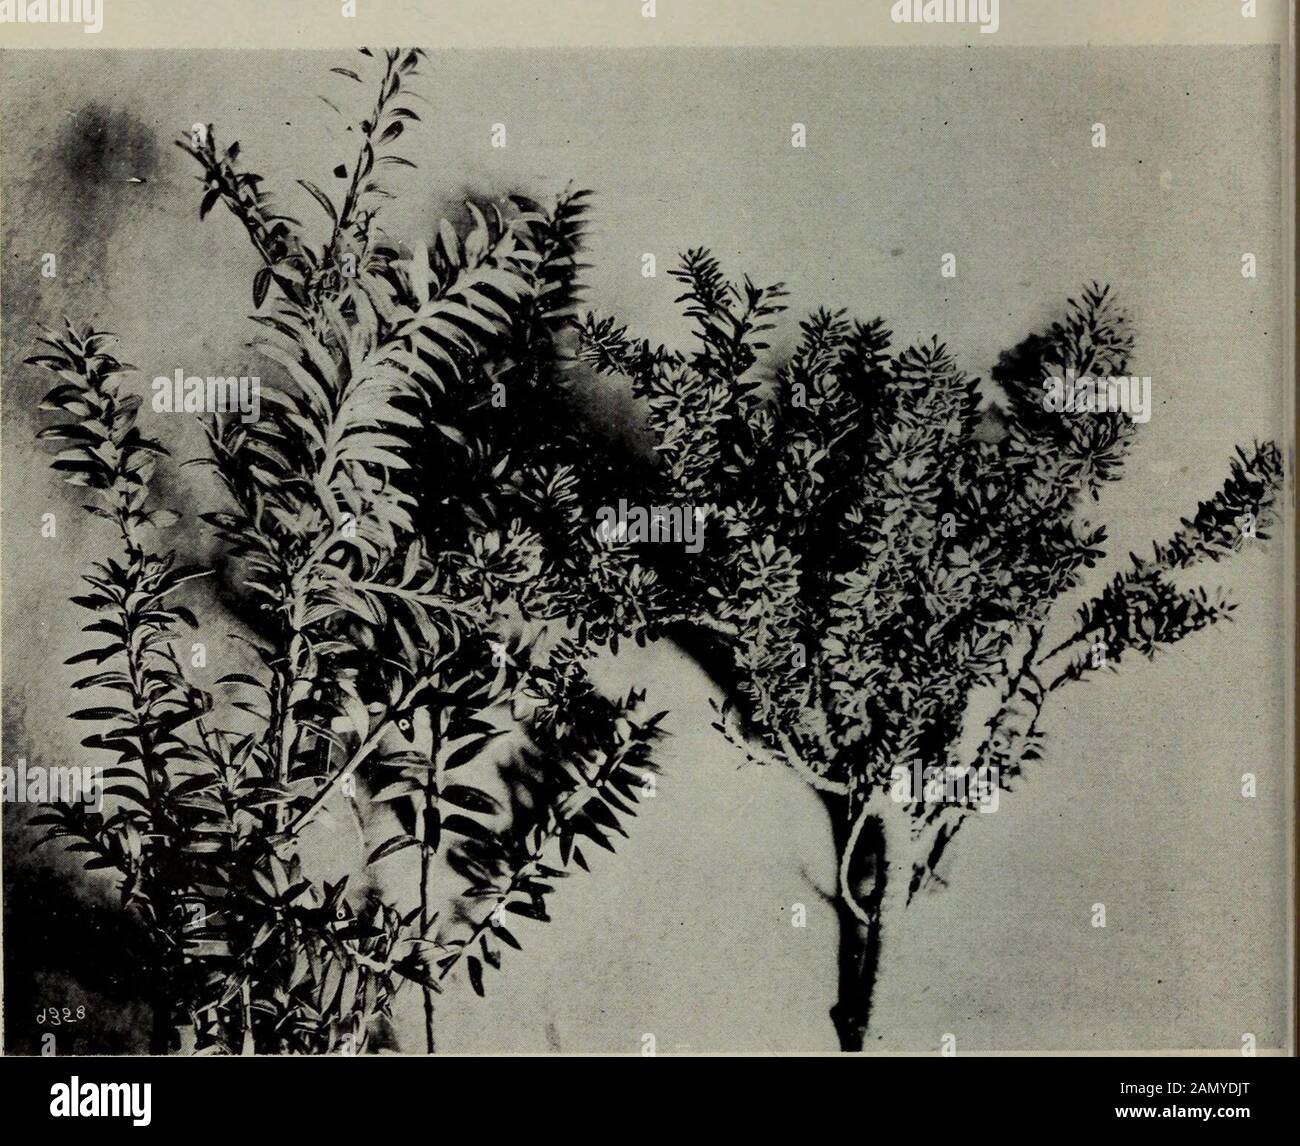 Transactions of the Royal Society of New Zealand . &lt;).. Fig. 2.—Pittosporum divaricatum.A shrub of the divaricating growth form Trans. N.Z. Inst., Vol. XL1V Plate IV. PODOCARPUS NIVALIS. On left, shade form ; on right, sun form. Plants from Otira Gorge. Cockayne.—Ecological Studies in Evolution. 21 straggling mats in 0. discolor Hook. f. and C. Walkeri T. Kirk, loose circularcushions in C. viscosa Hook, f., and true dense cushions in C. s%silifloraHook. f. and C. argentea T. Kirk. Frequently the epharmony of such cushions can be seen clearly in oneand the same species, as in the tiny taxad Stock Photo